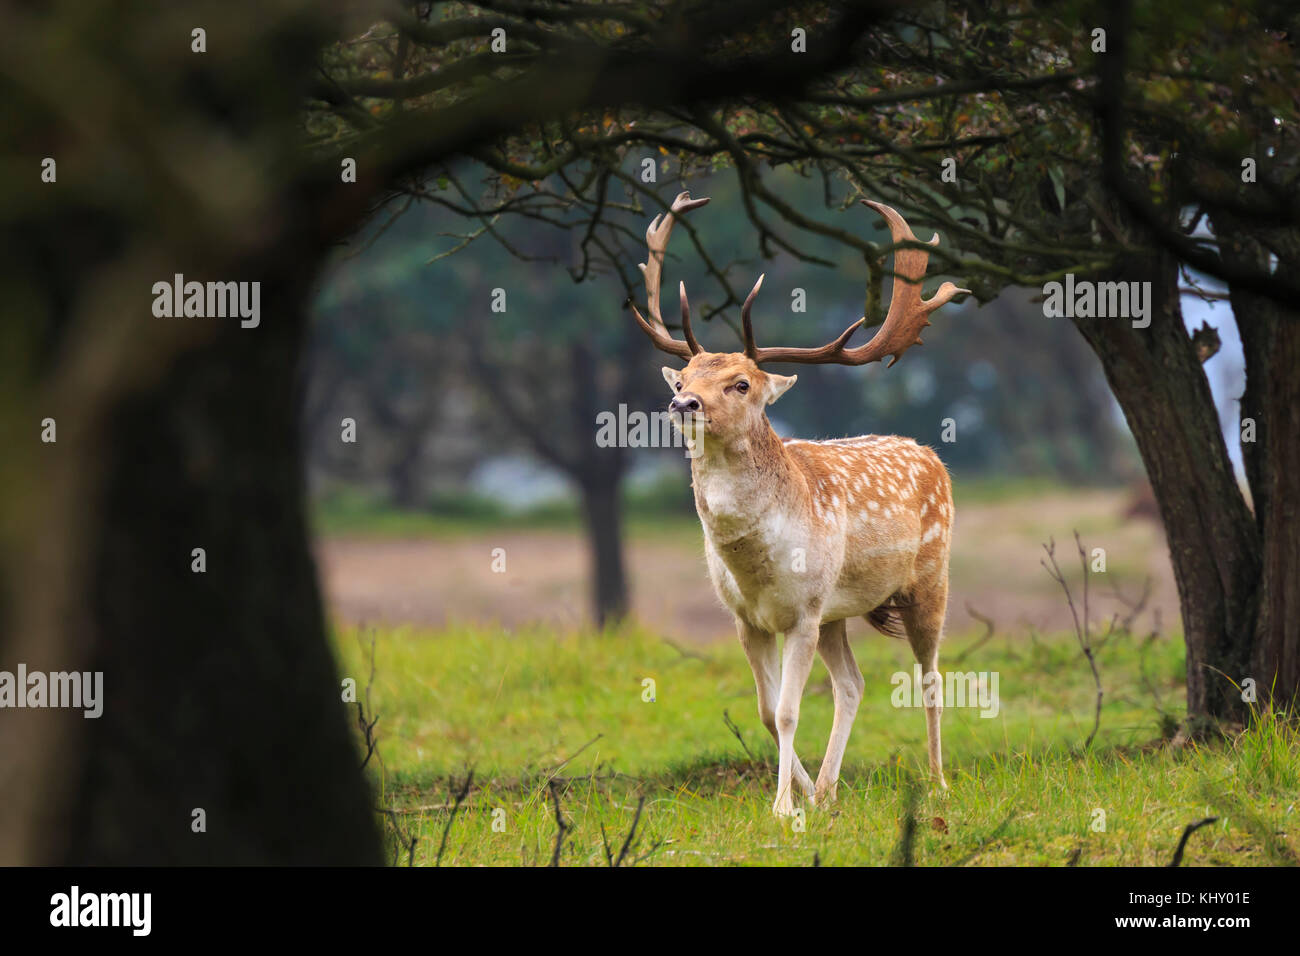 Big Fallow deer buck, Dama Dama, with large antlers walking in a green forest during Autumn season. Stock Photo